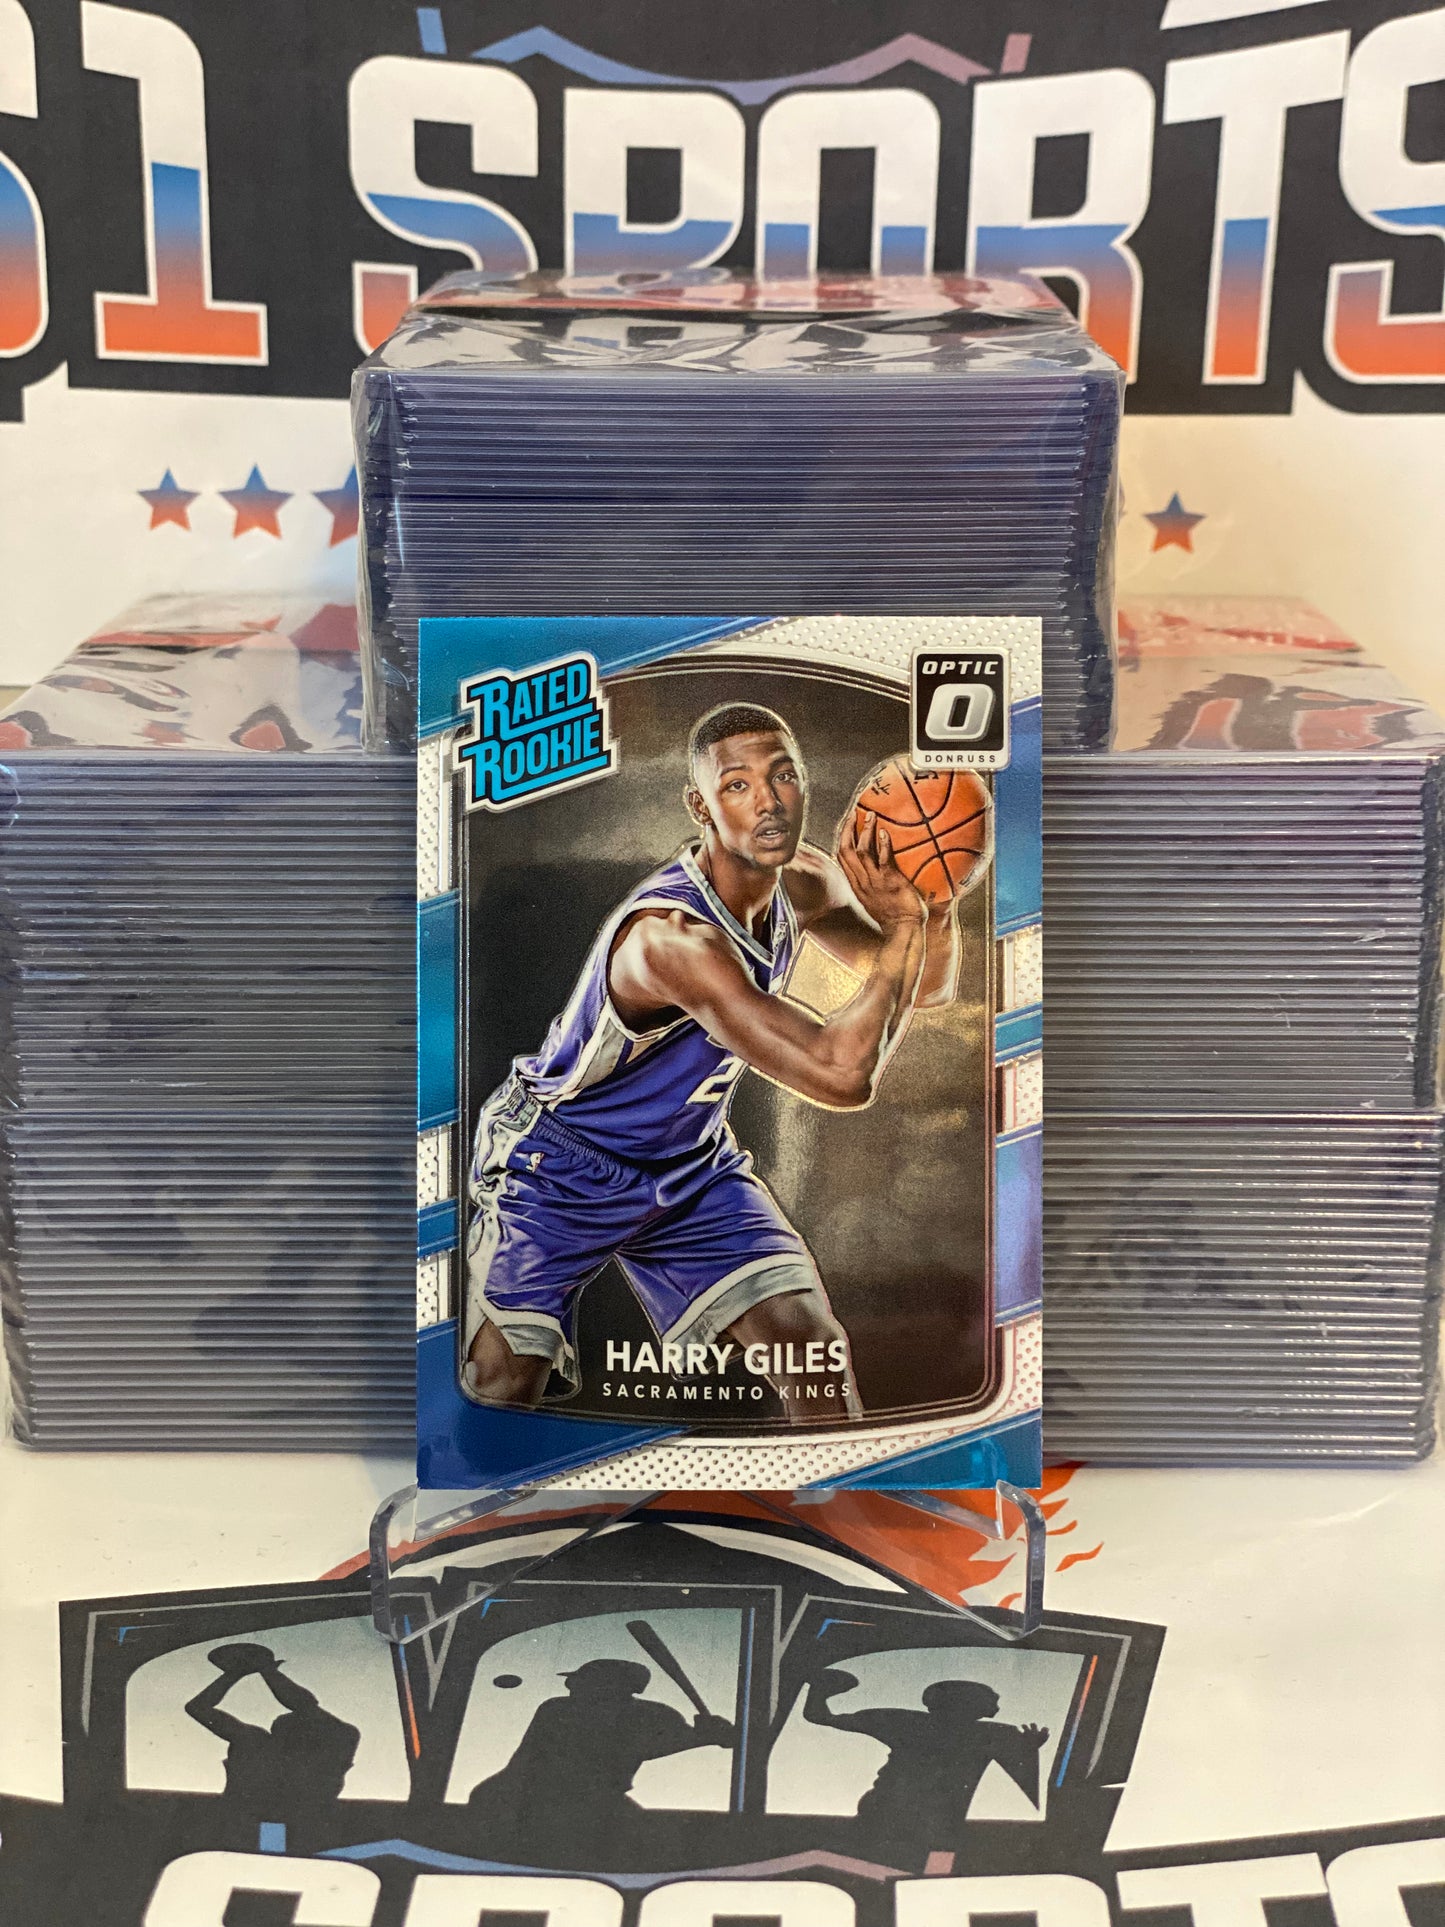 2017 Donruss Optic (Rated Rookie) Harry Giles #181